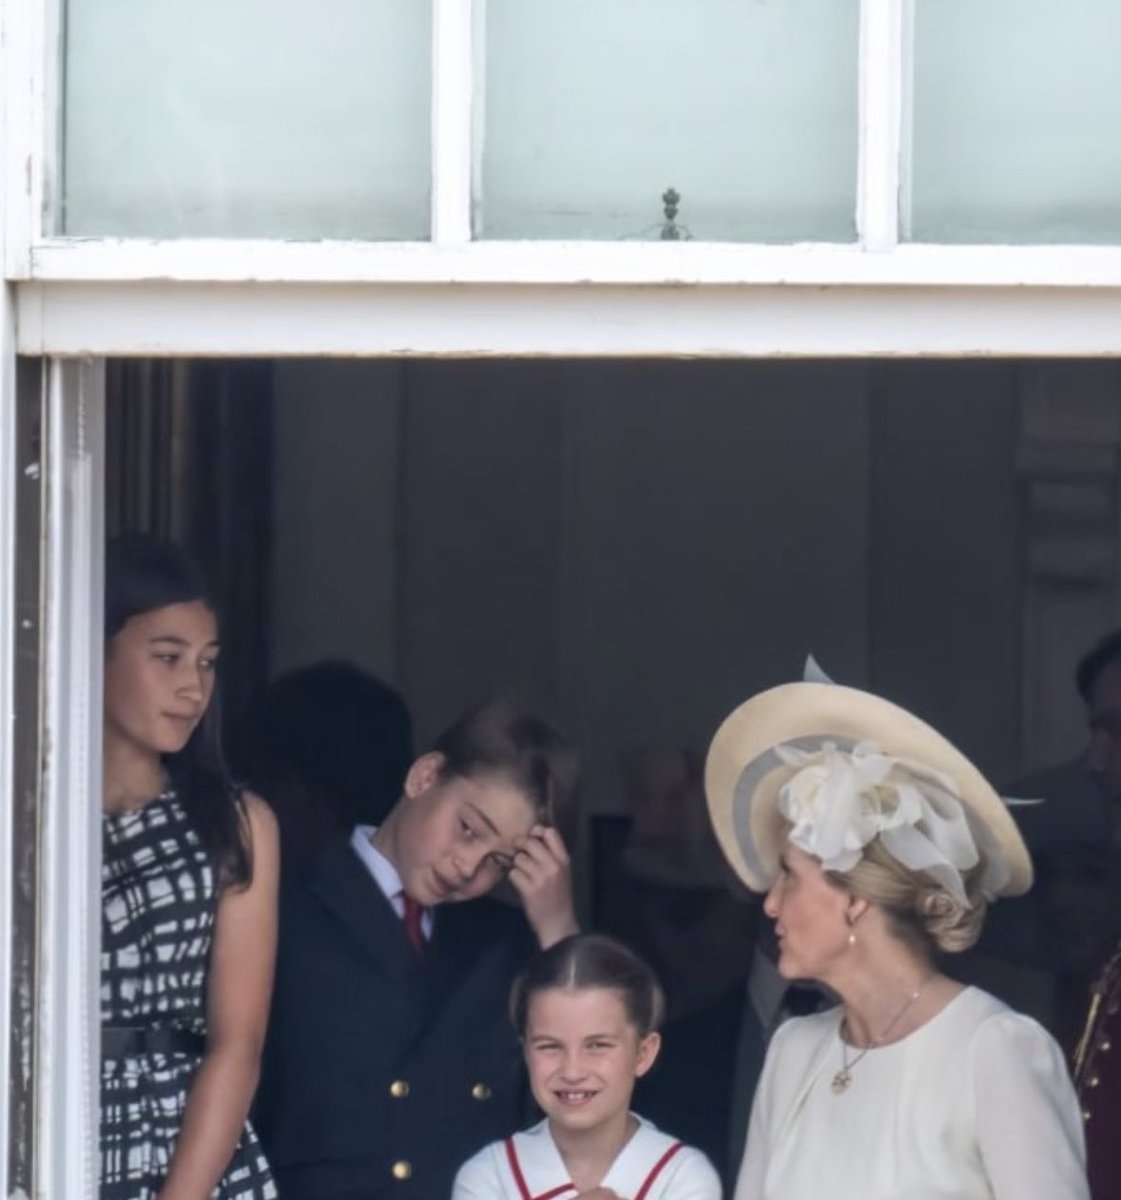 The Duchess of Edinburgh, Prince George, Princess Charlotte and Miss Senna Lewis (and in the 2nd pic The Duke of Gloucester and I think Samuel Chatto) watching Trooping The Colour from the Horseguards balcony this morning ❤️